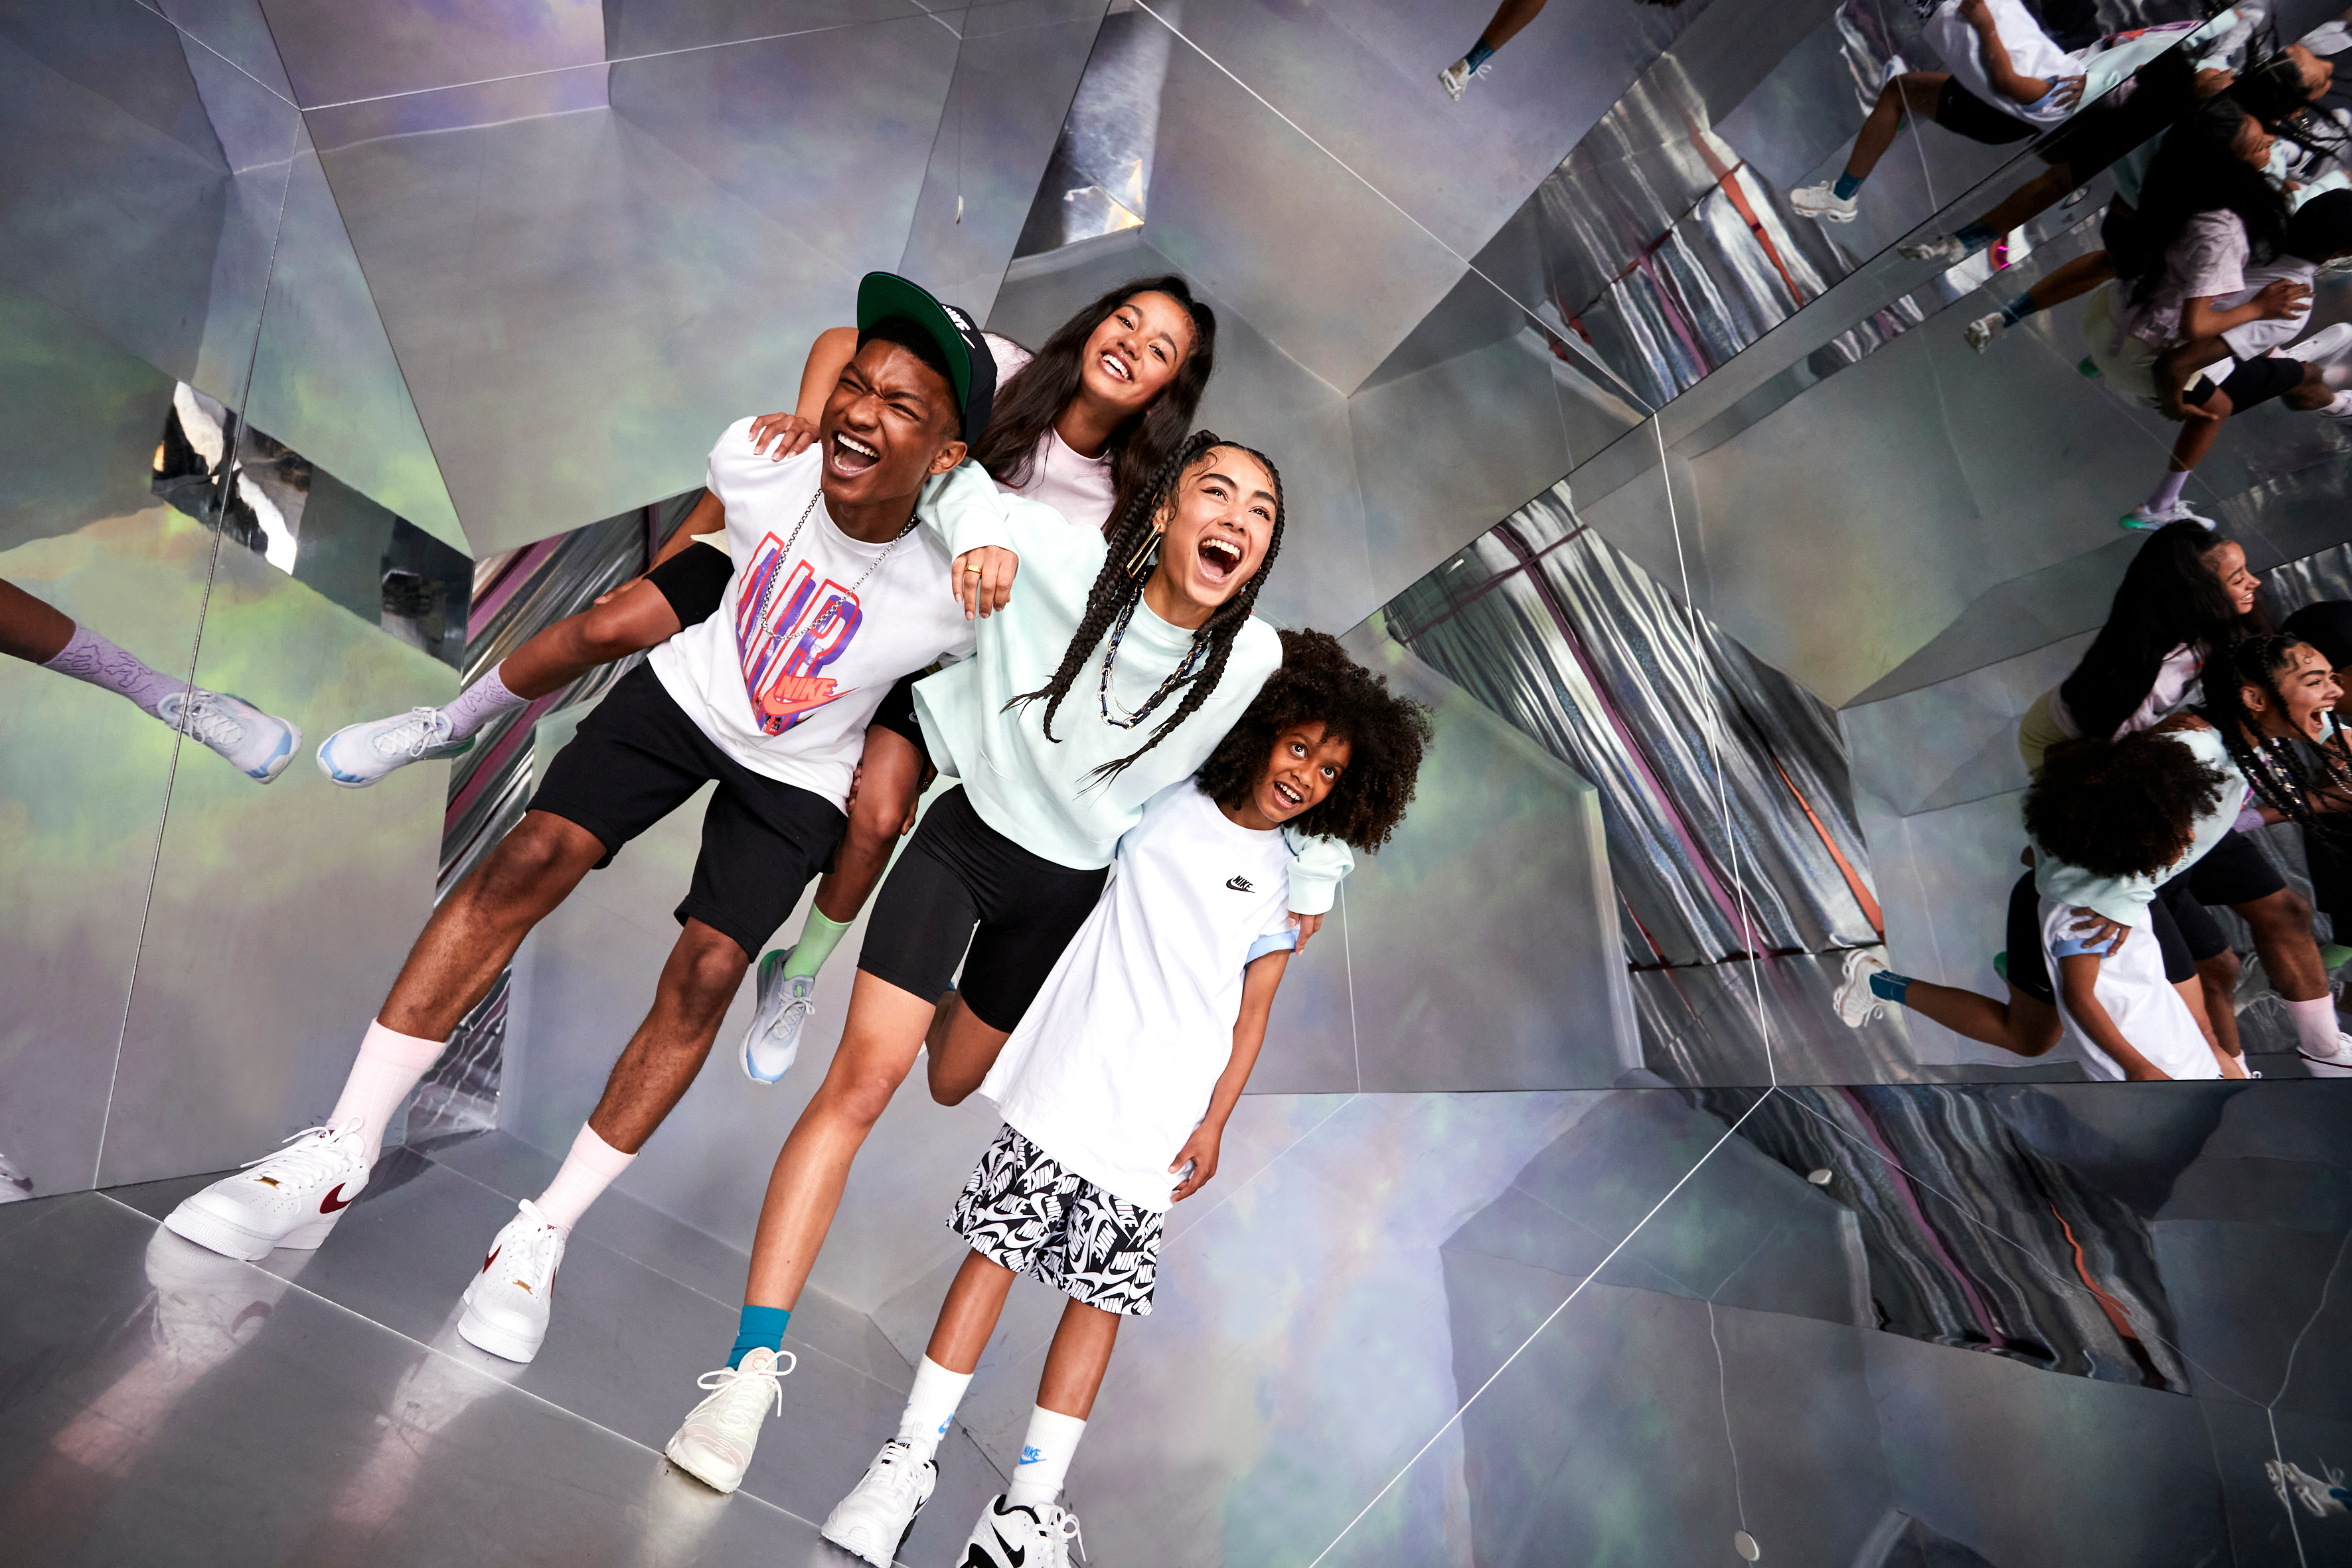 Kidz Management for Footlocker cover picture